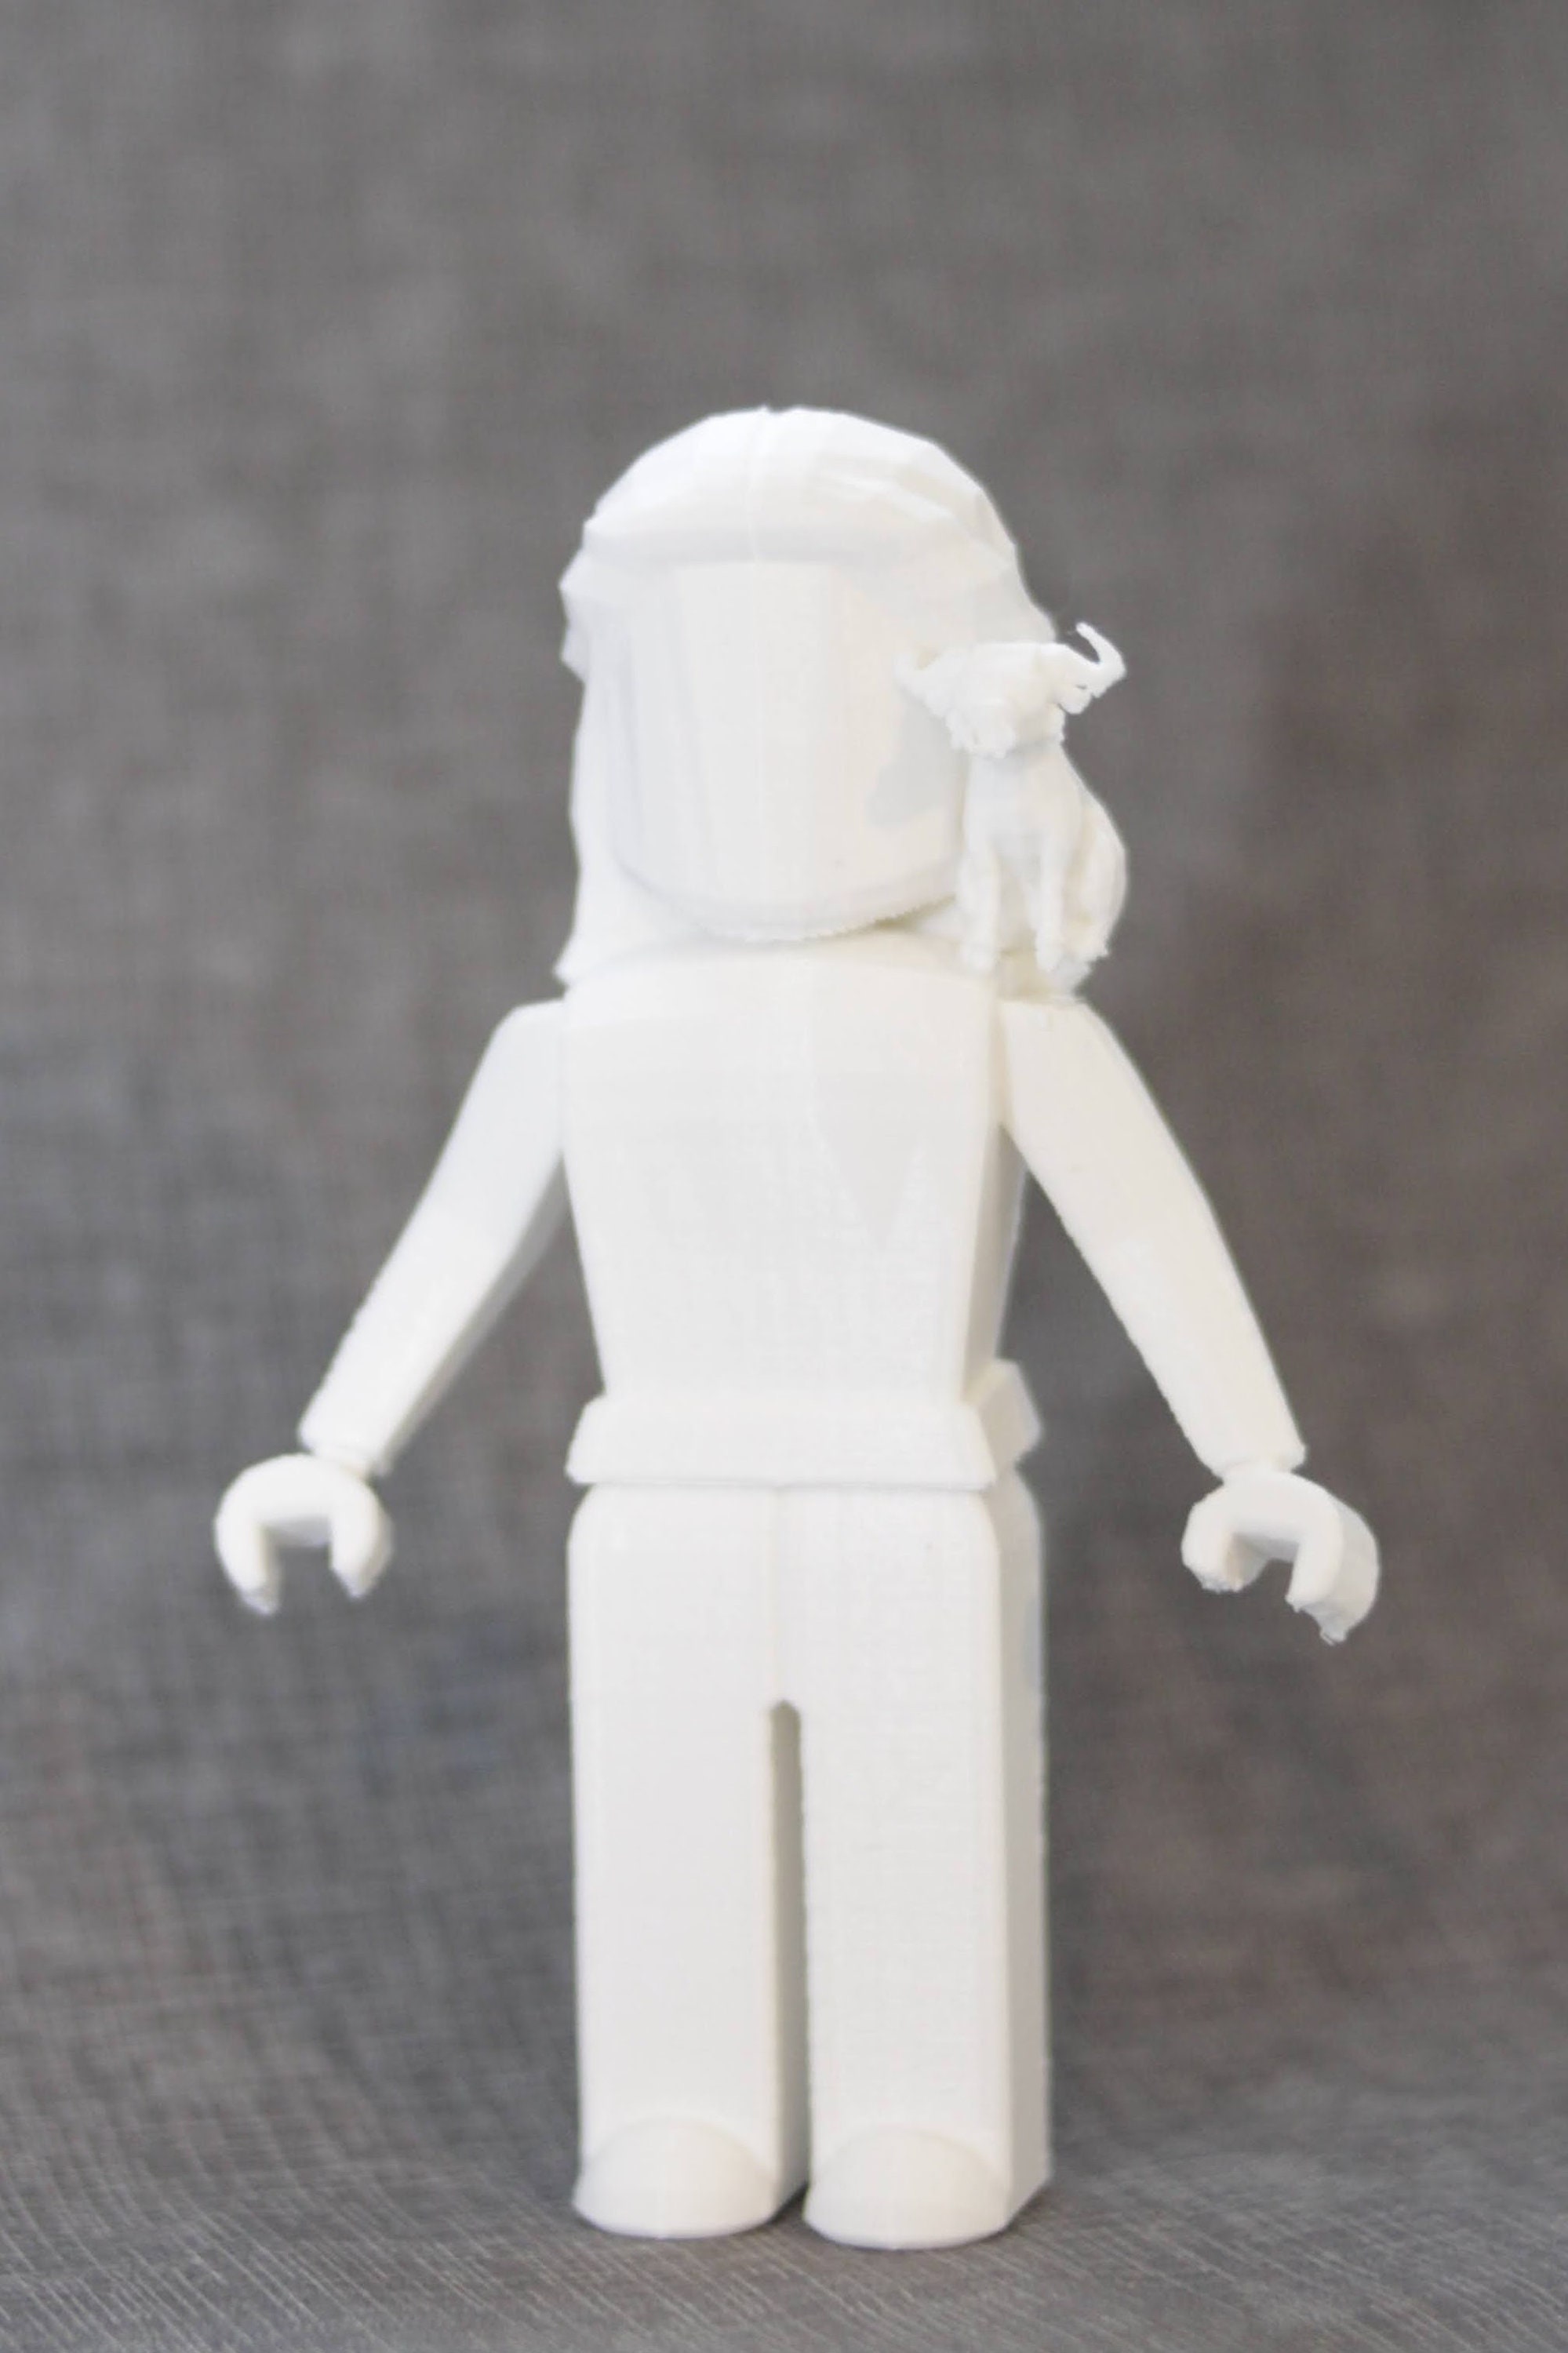 3D Printed Roblox Avatars Feedback [Have your avatar printed